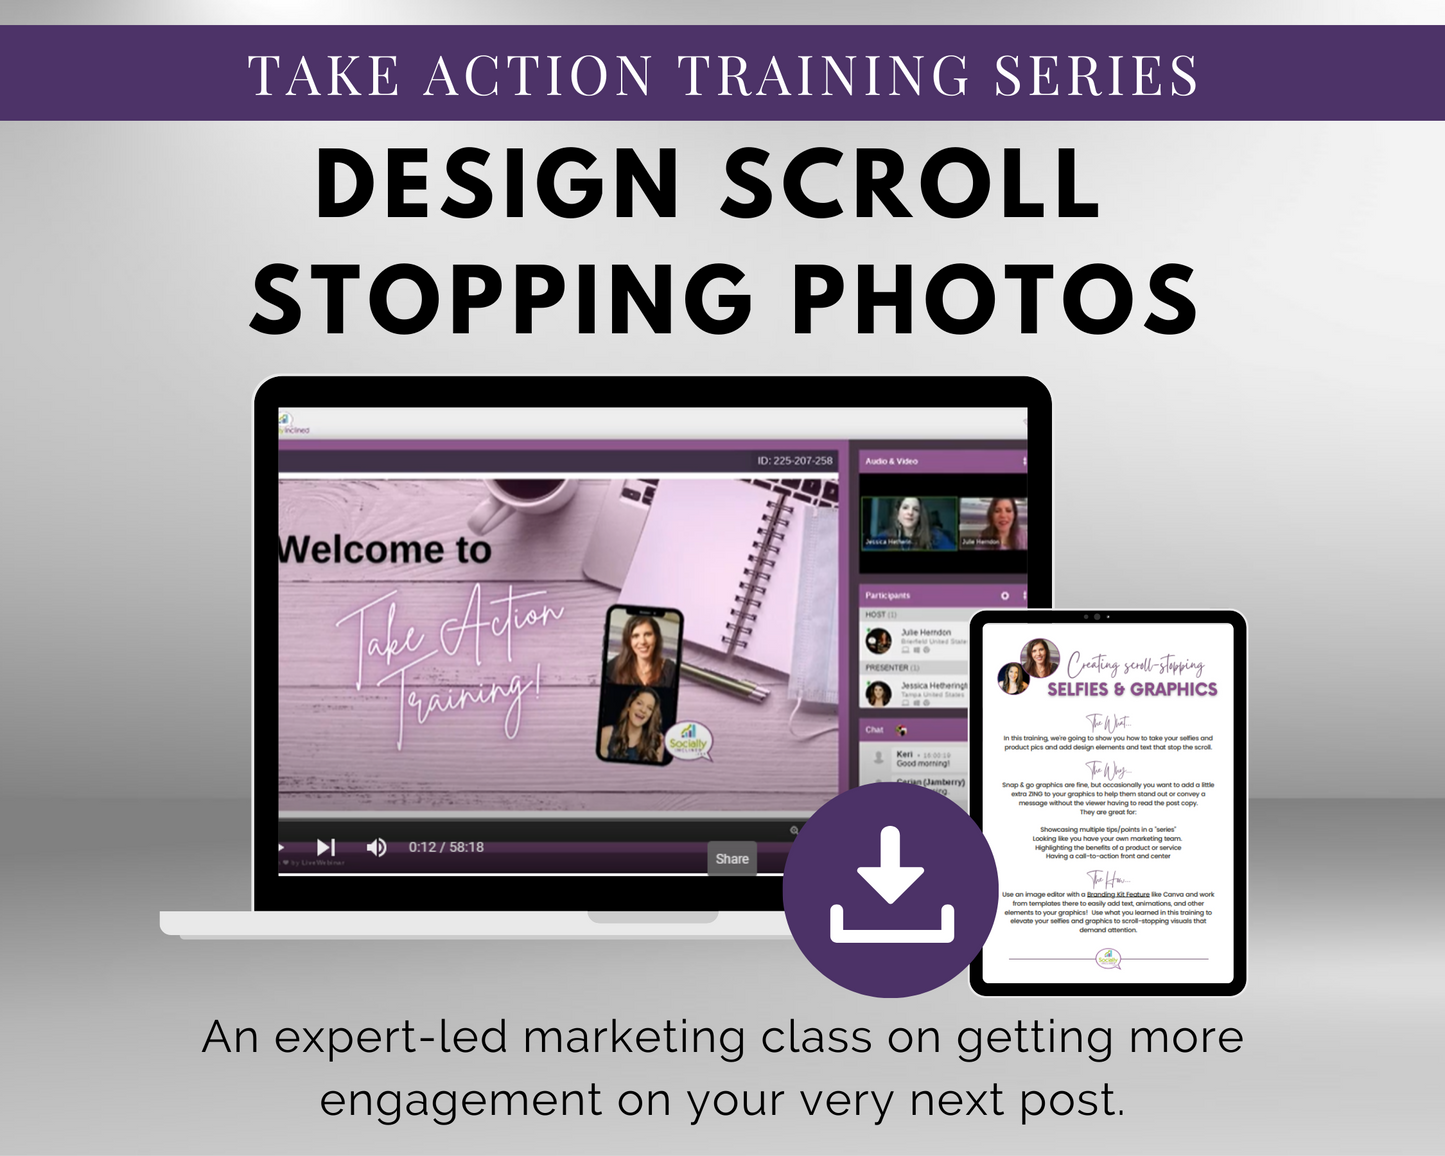 Take action training series TAT - Design Scroll Stopping Photos Masterclass by Get Socially Inclined.